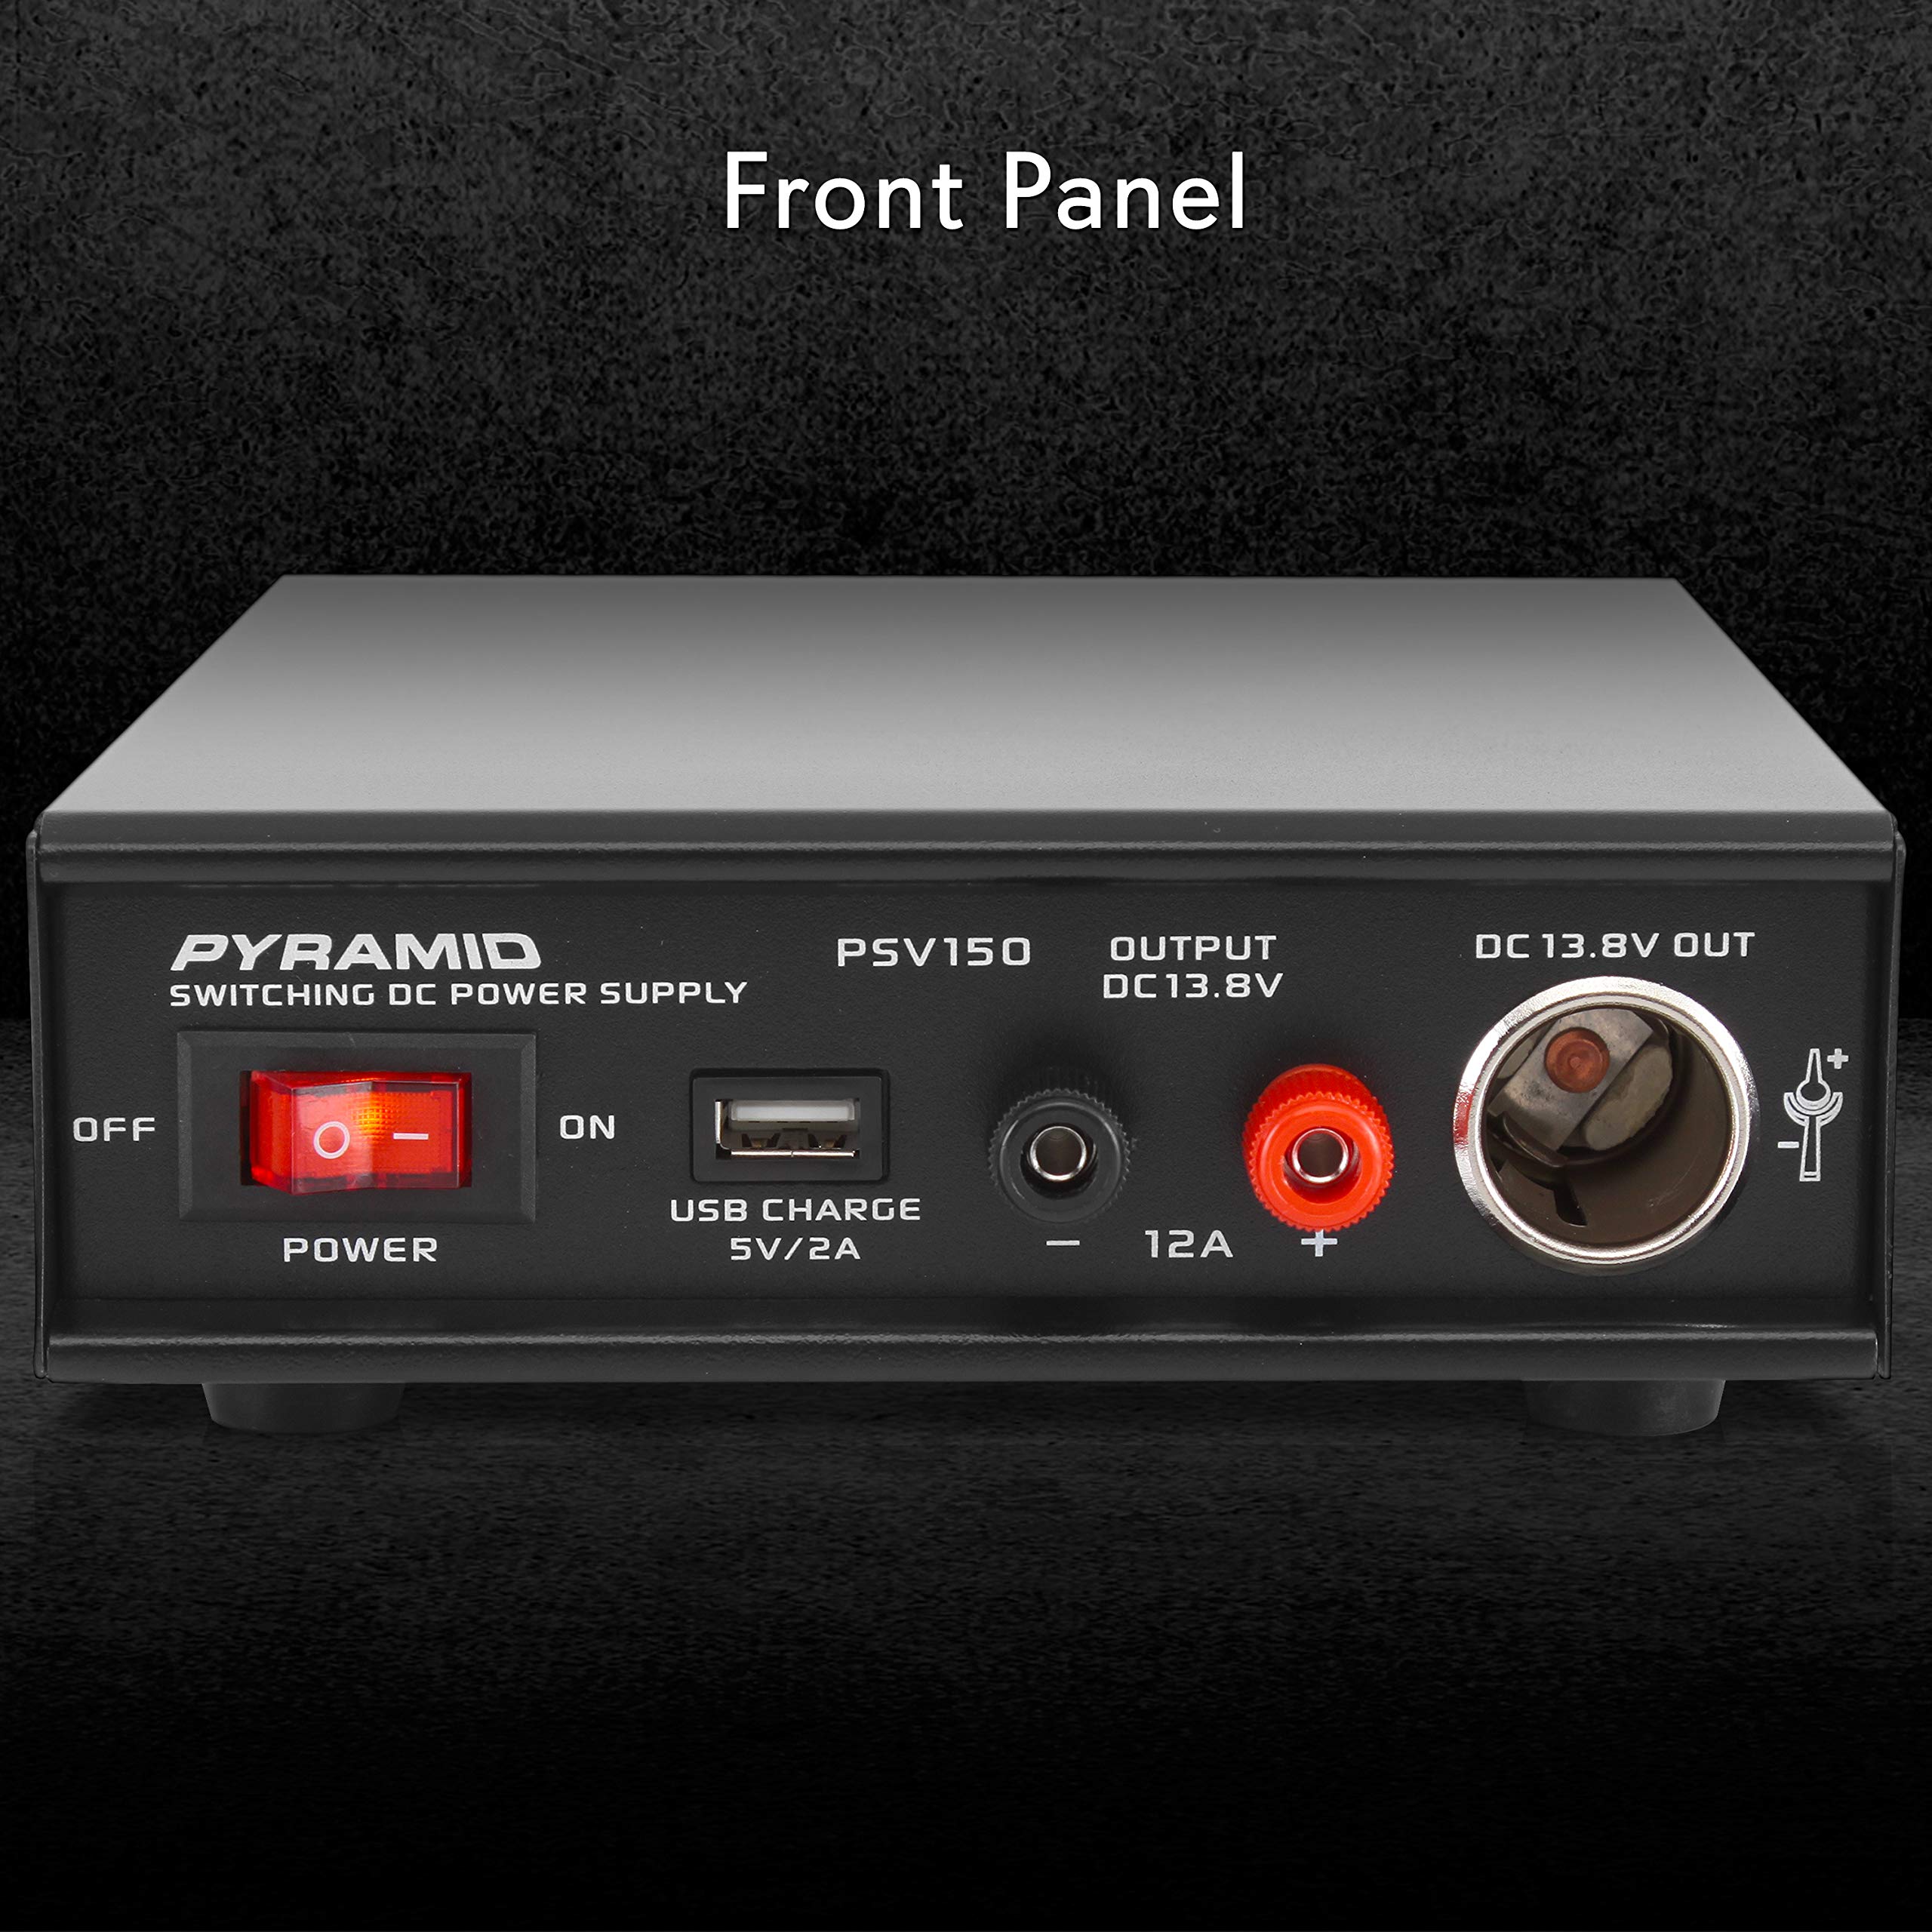 Pyramid Universal AC-DC 12V Power Supply Converter: Dual 115/230V AC Input, USB Port, Car Cigarette Lighter Socket Screw Terminal, Cooling Fan - for Home and Lab Use